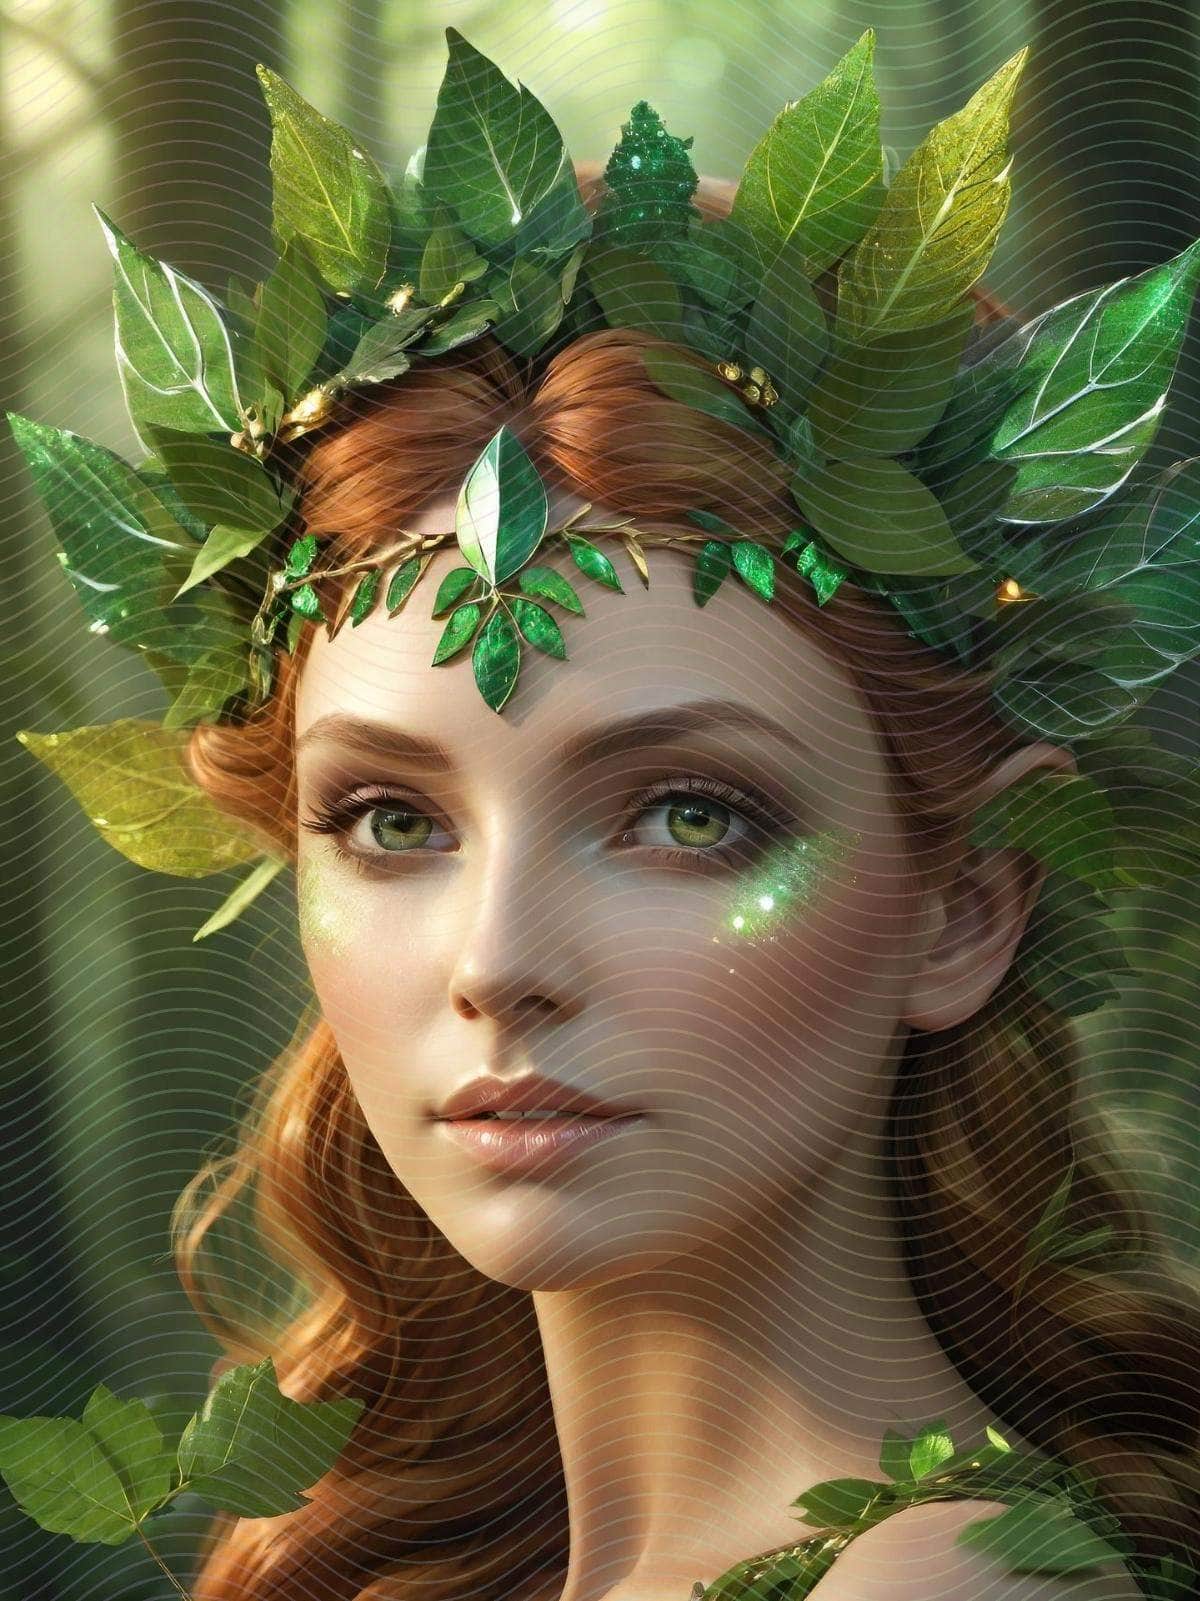 A Fairy Glitter Goddess with Leaves on Her Hair